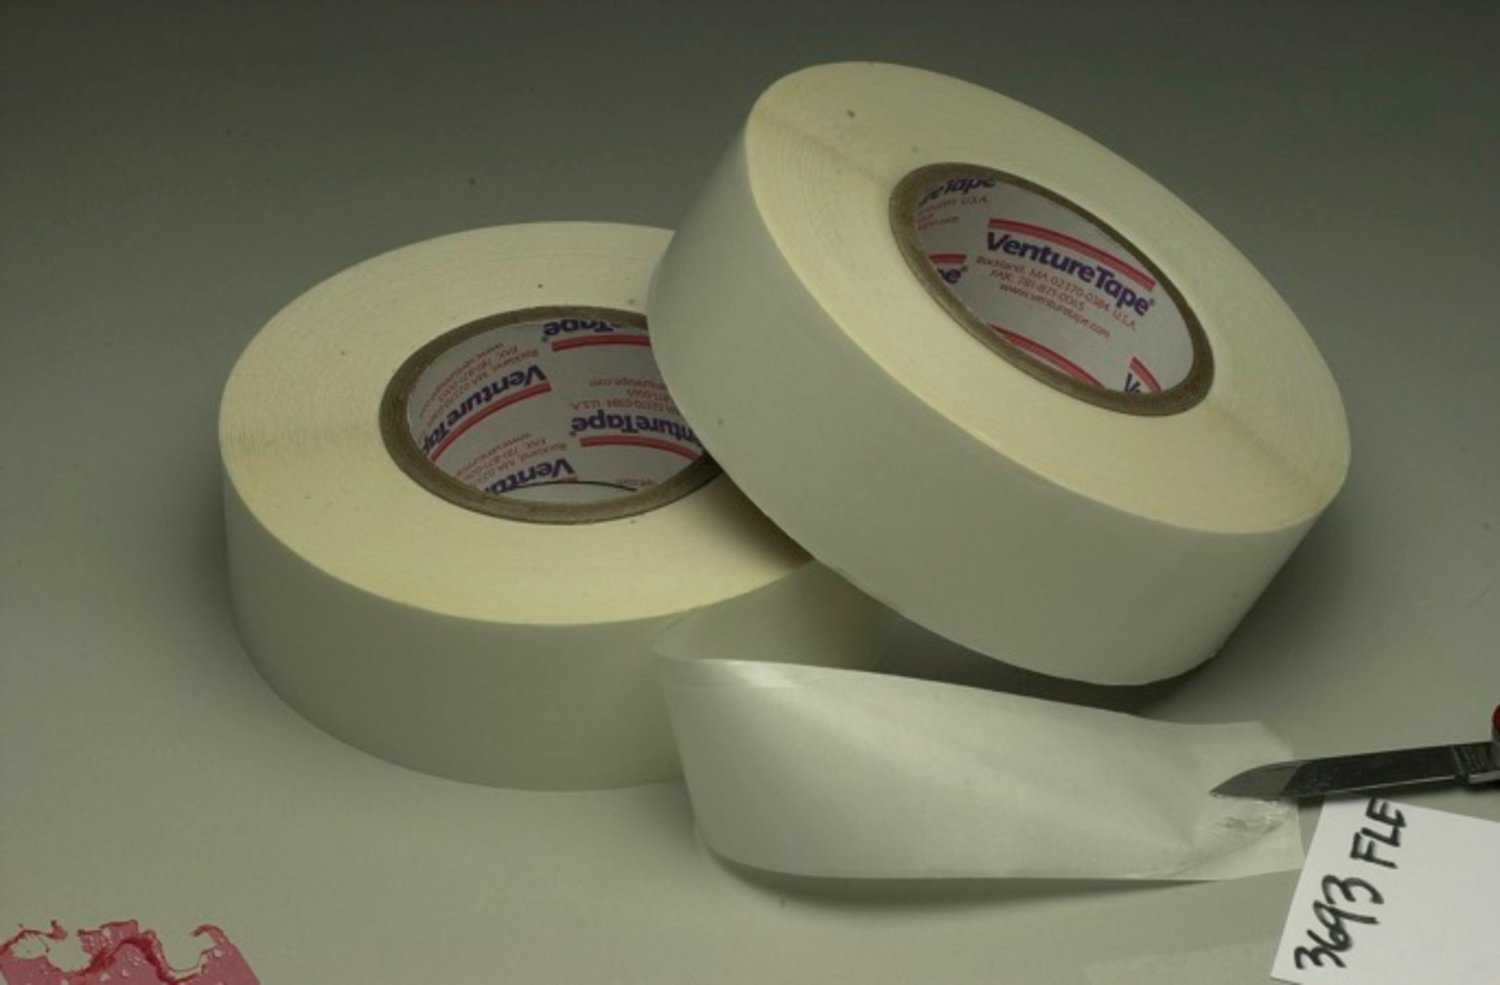 7100043790 - 3M Venture Tape Double Coated Nylon Tape 3693FLE, Right Hand, 1.5 in x 500 yd, 4 Rolls/Case